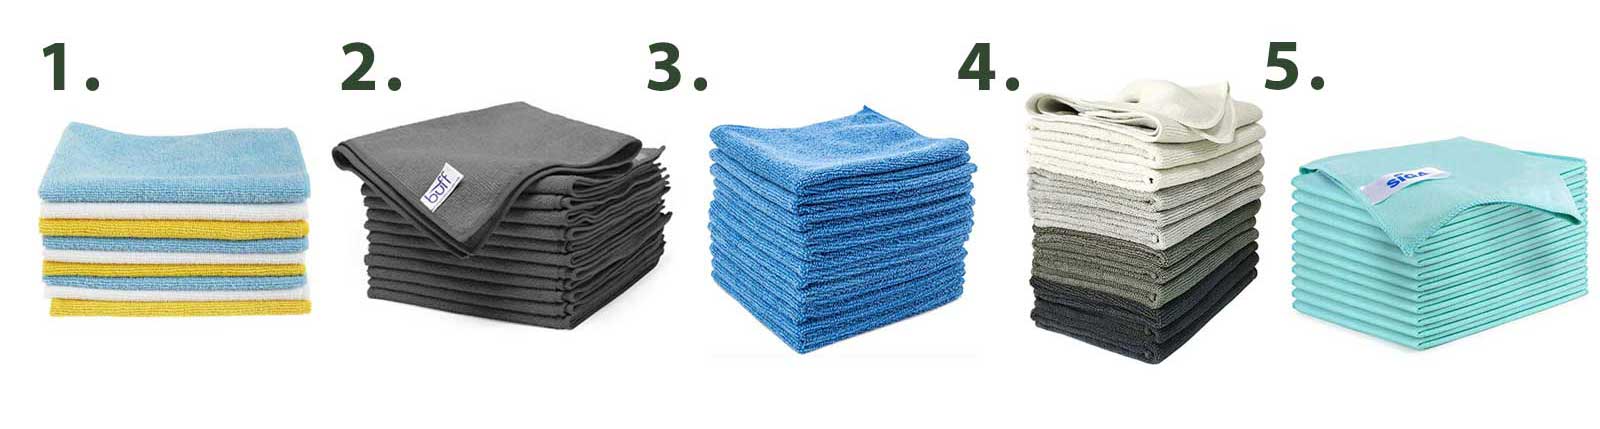 Tools for a paper-free kitchen - Microfiber